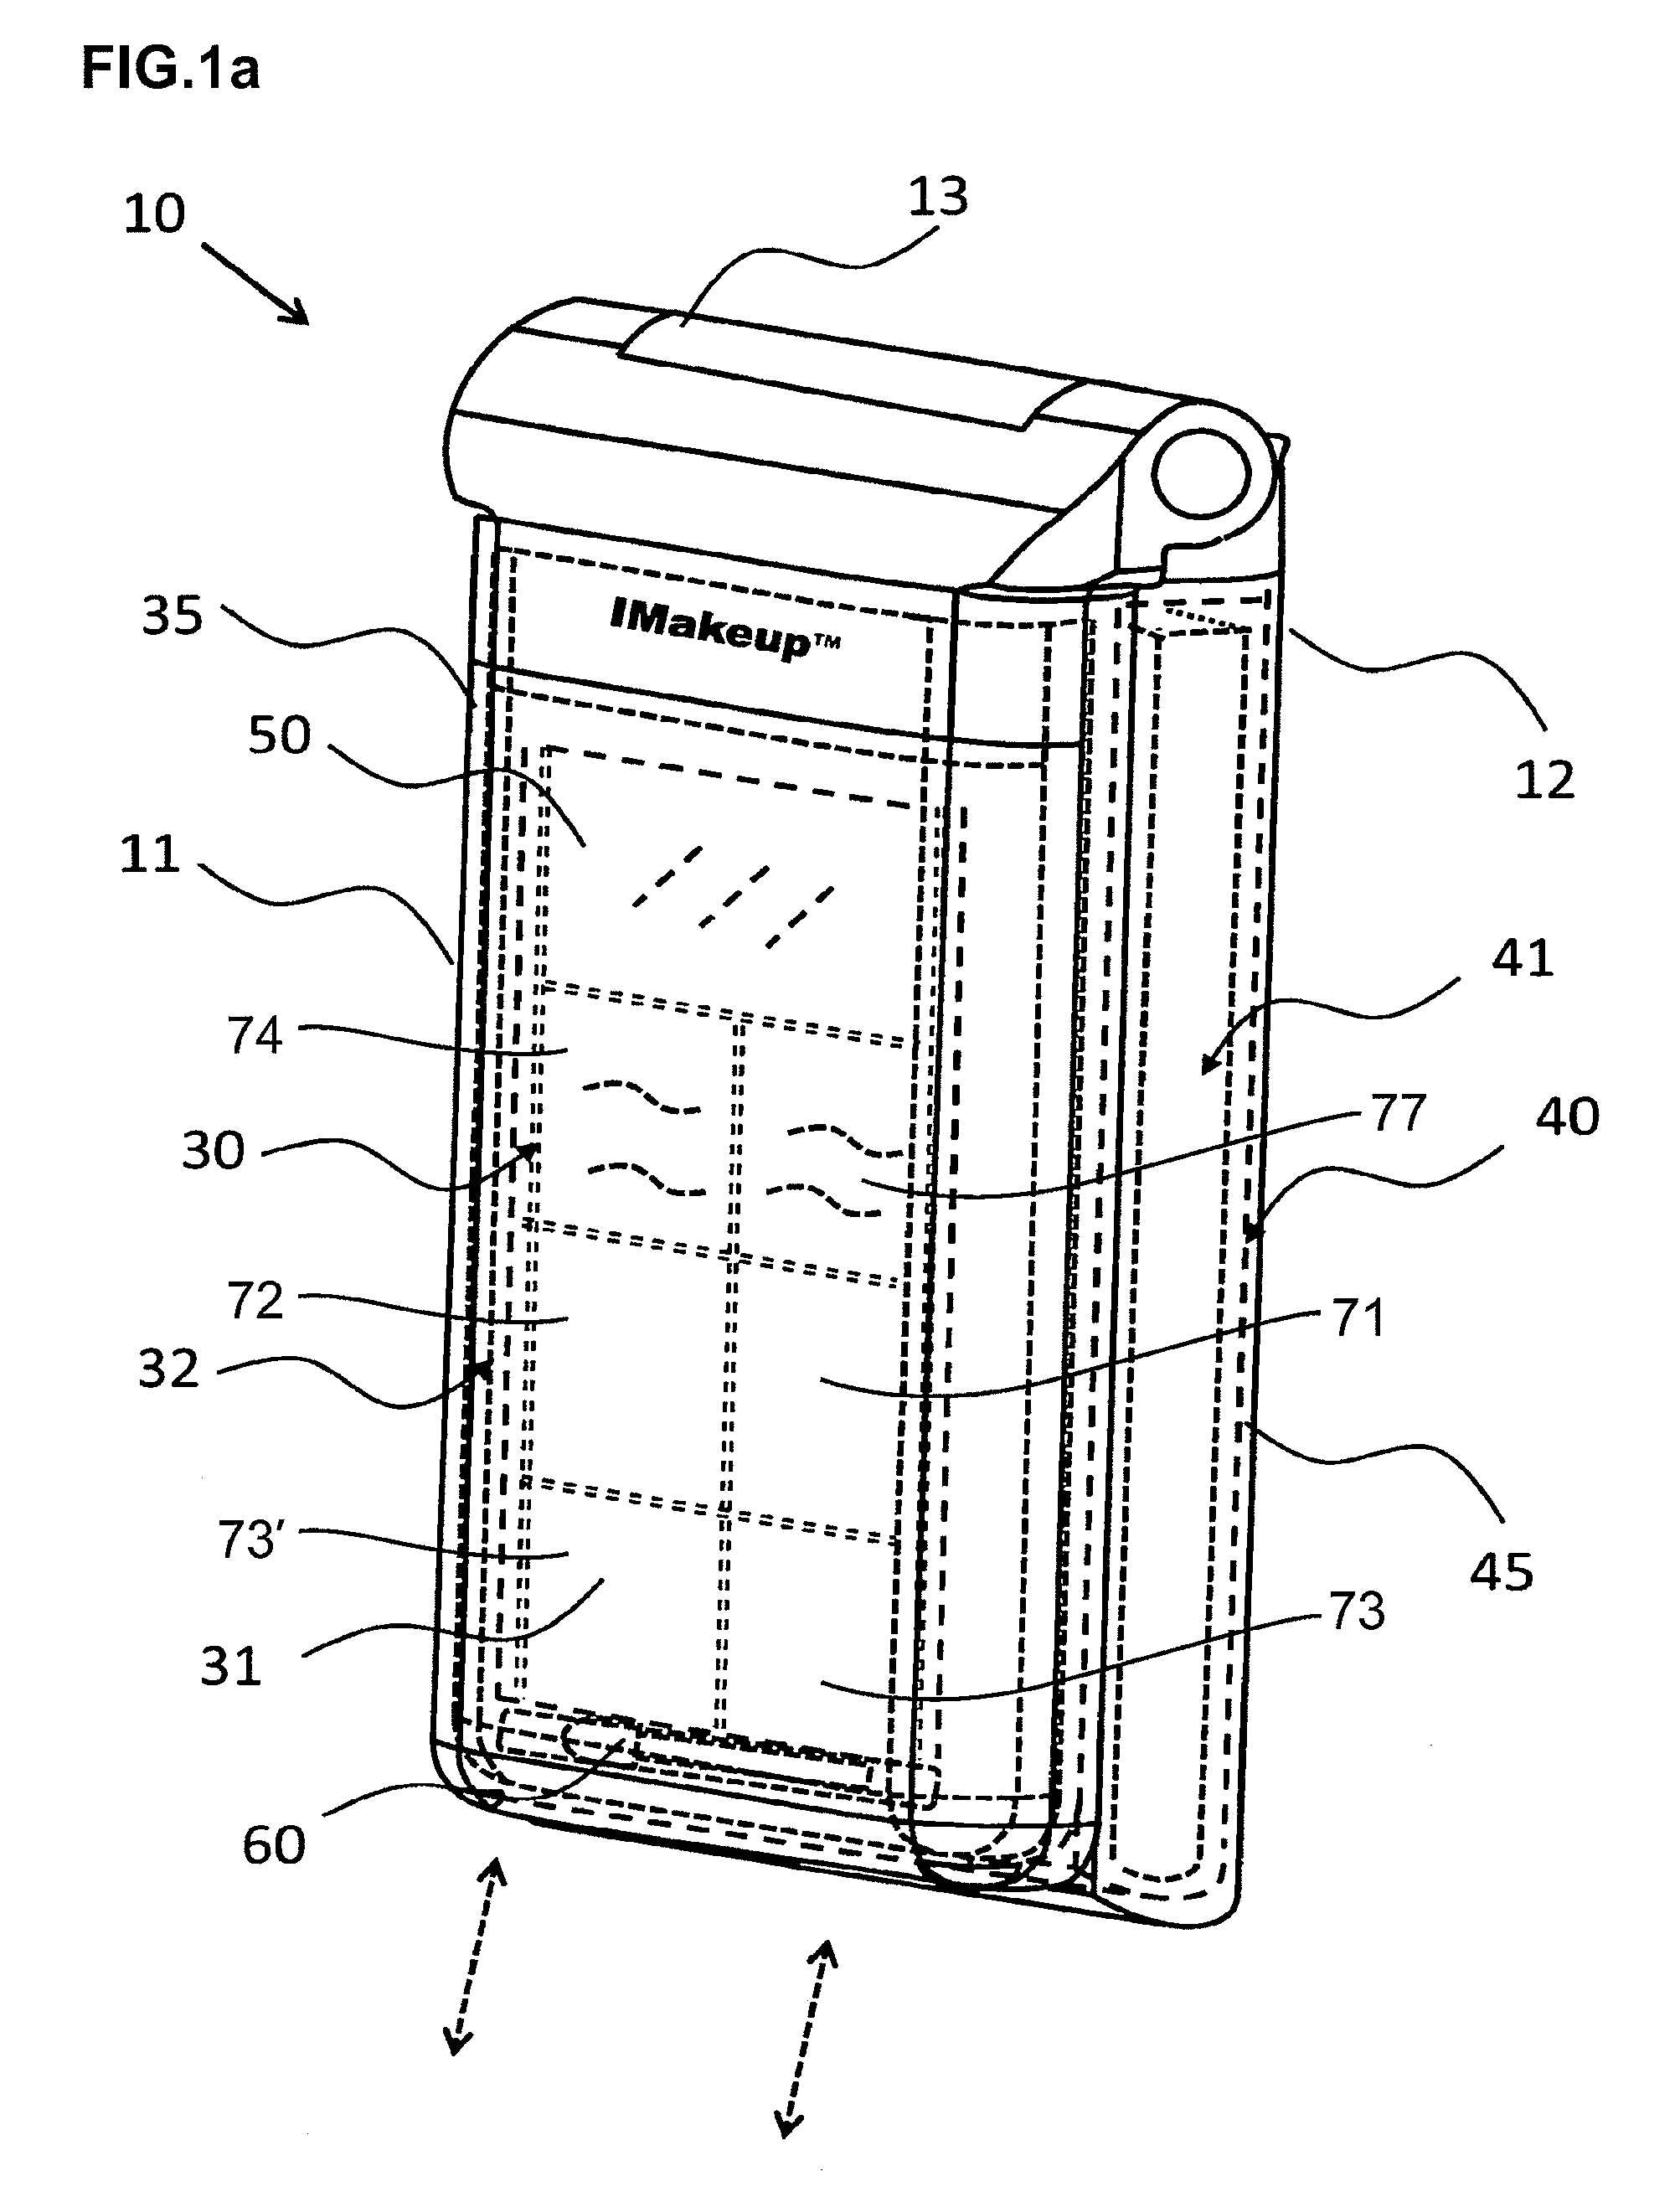 Compartmentalized protective case for portable handheld electronic devices